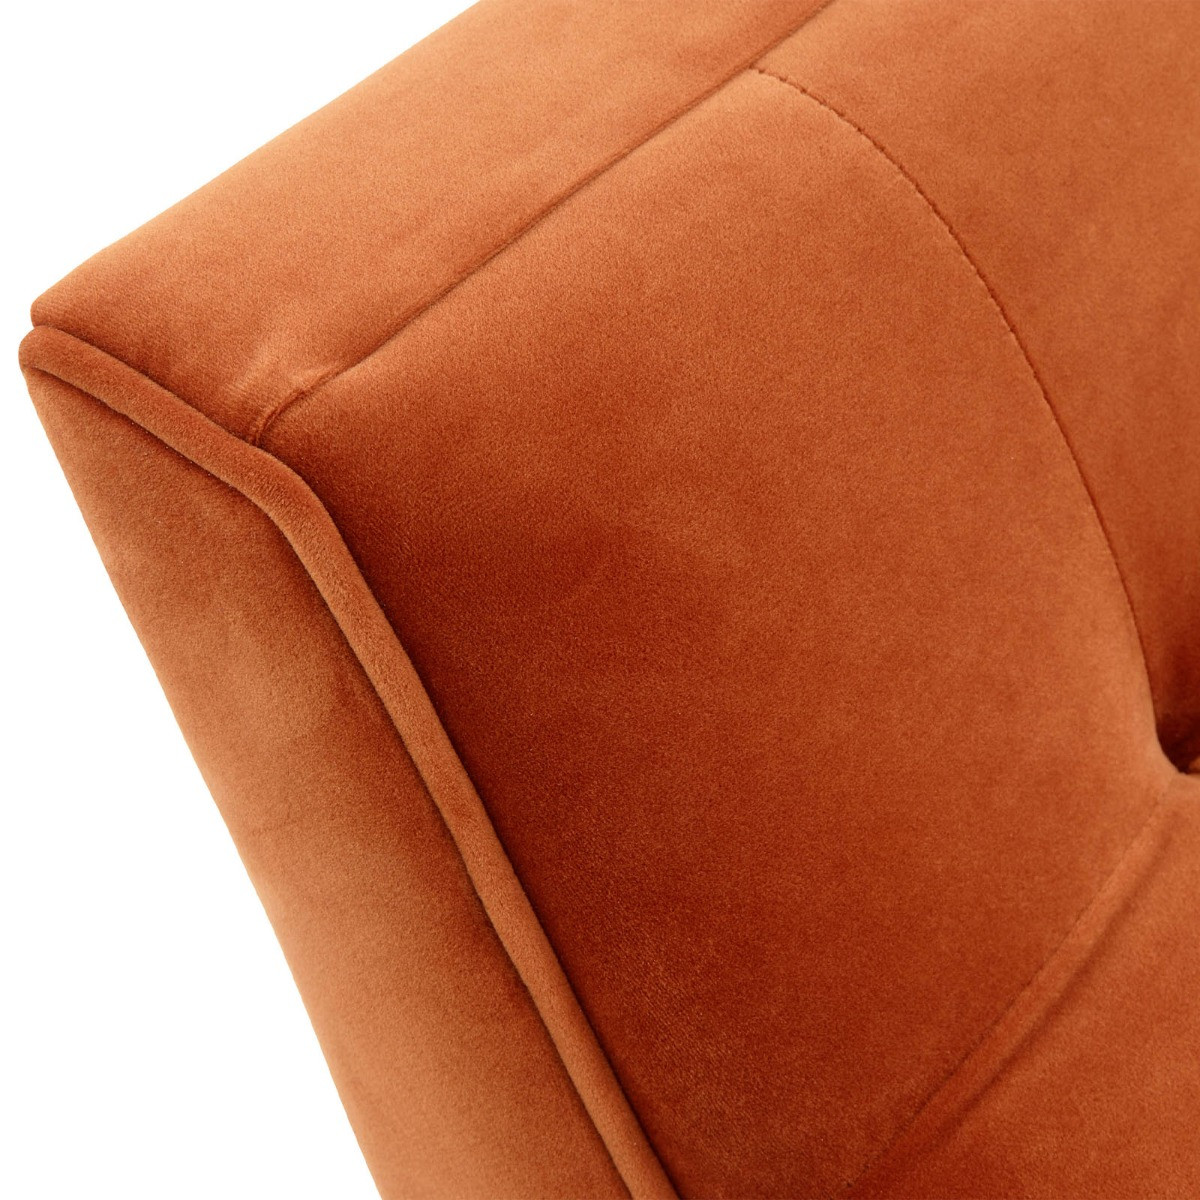 Turin Upholstered Window Seat - Russet>